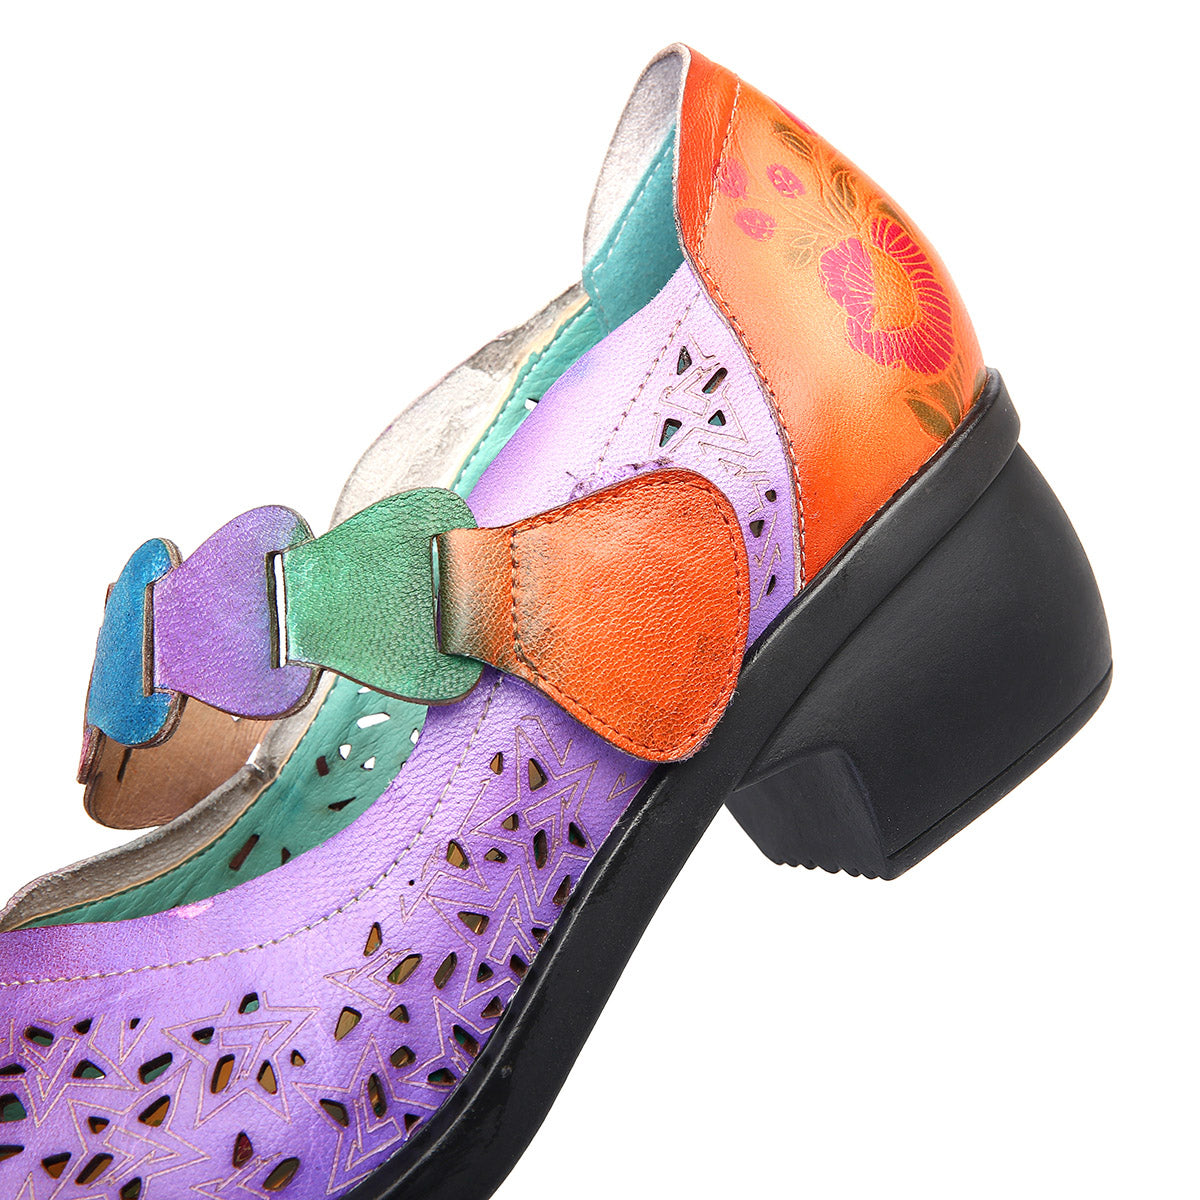 Women's Colorful Shoes